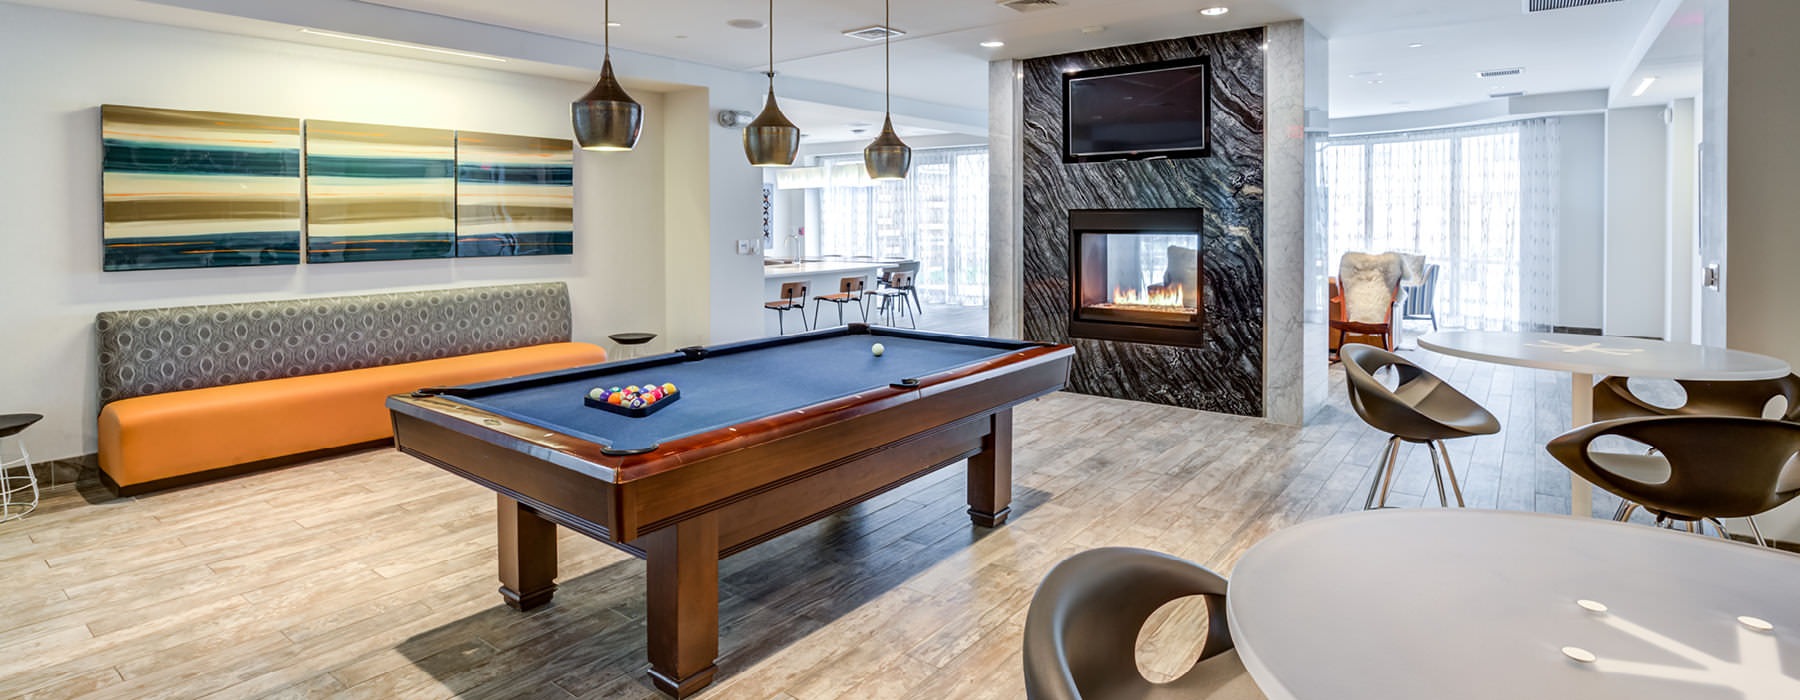 Pool Table and Gaming Area with recessed lighting throughout